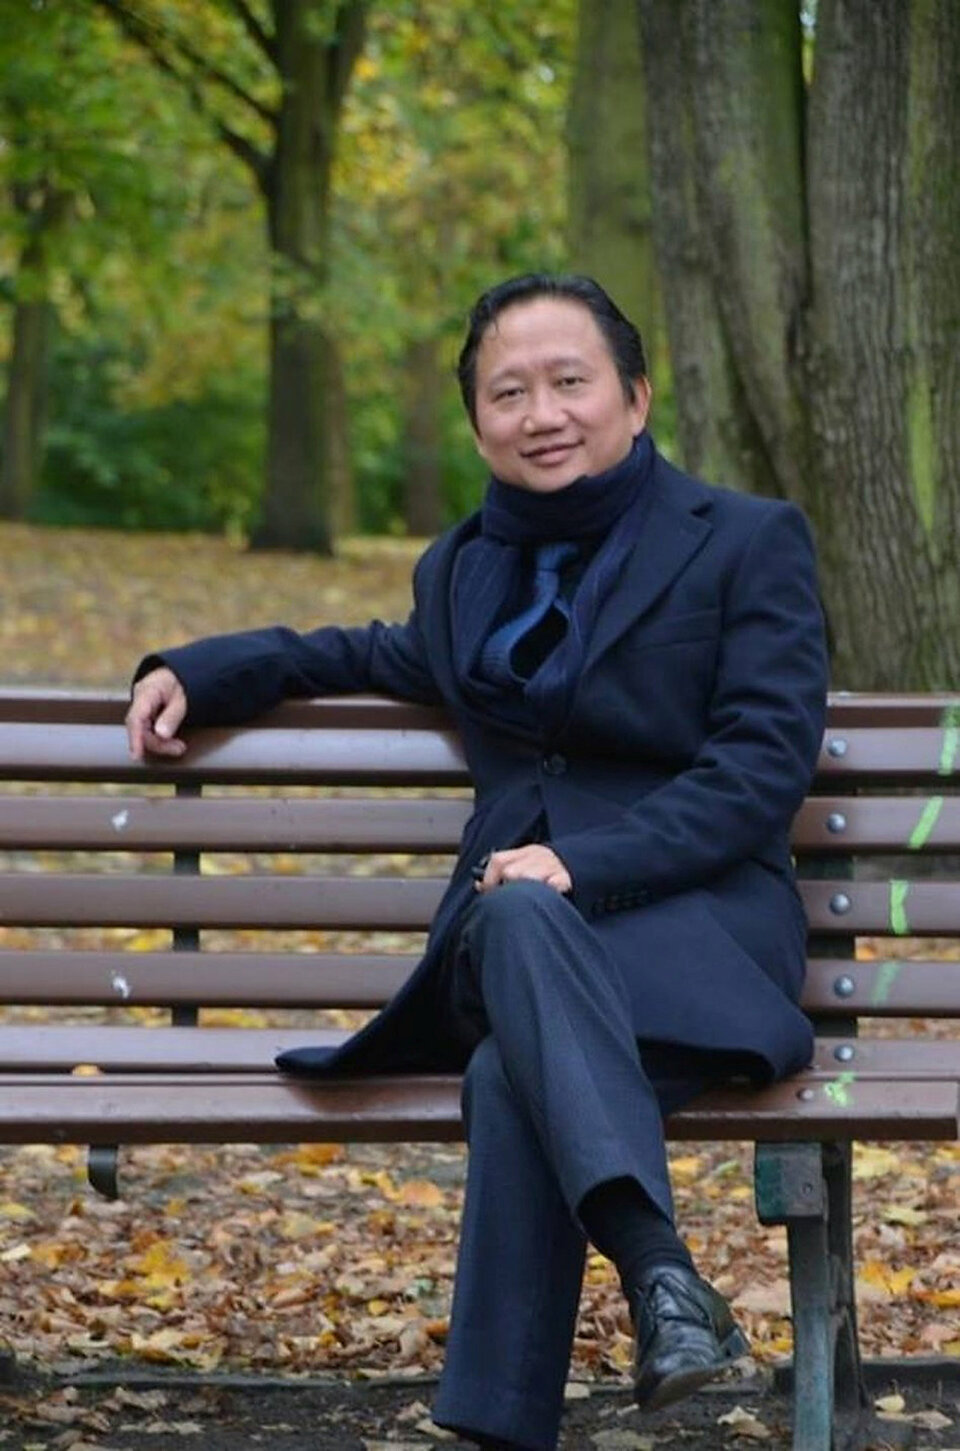 Trinh Xuan Thanh, a former official at state oil company PetroVietnam, sits on a park bench in Berlin in this undated photo. Vietnam's state television on Aug. 3, 2017 broadcast images of the former state oil executive saying he had turned himself into authorities in the Southeast Asian country, after Germany accused Vietnam of having kidnapped Thanh who was seeking asylum. (Reuters Photo/DPA)